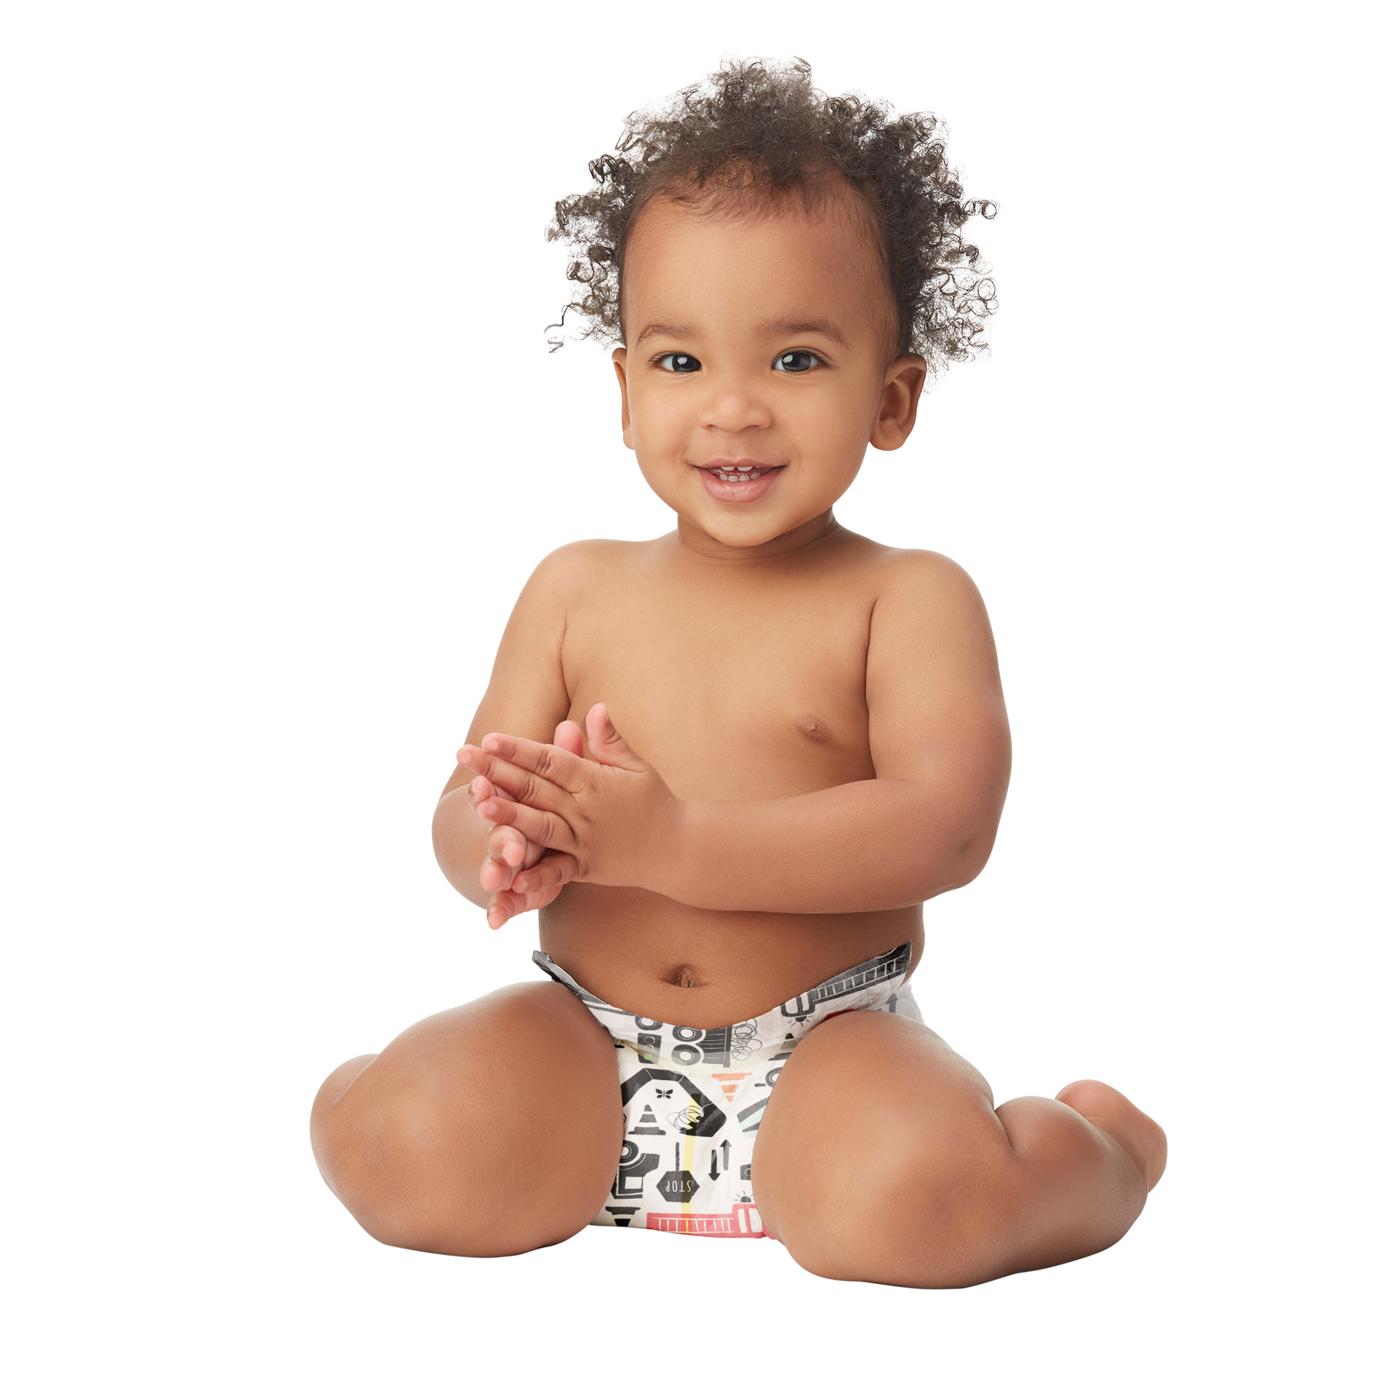 The Honest Company Clean Conscious Diapers Club Box - Size 6, 2 Print Pack; image 3 of 5